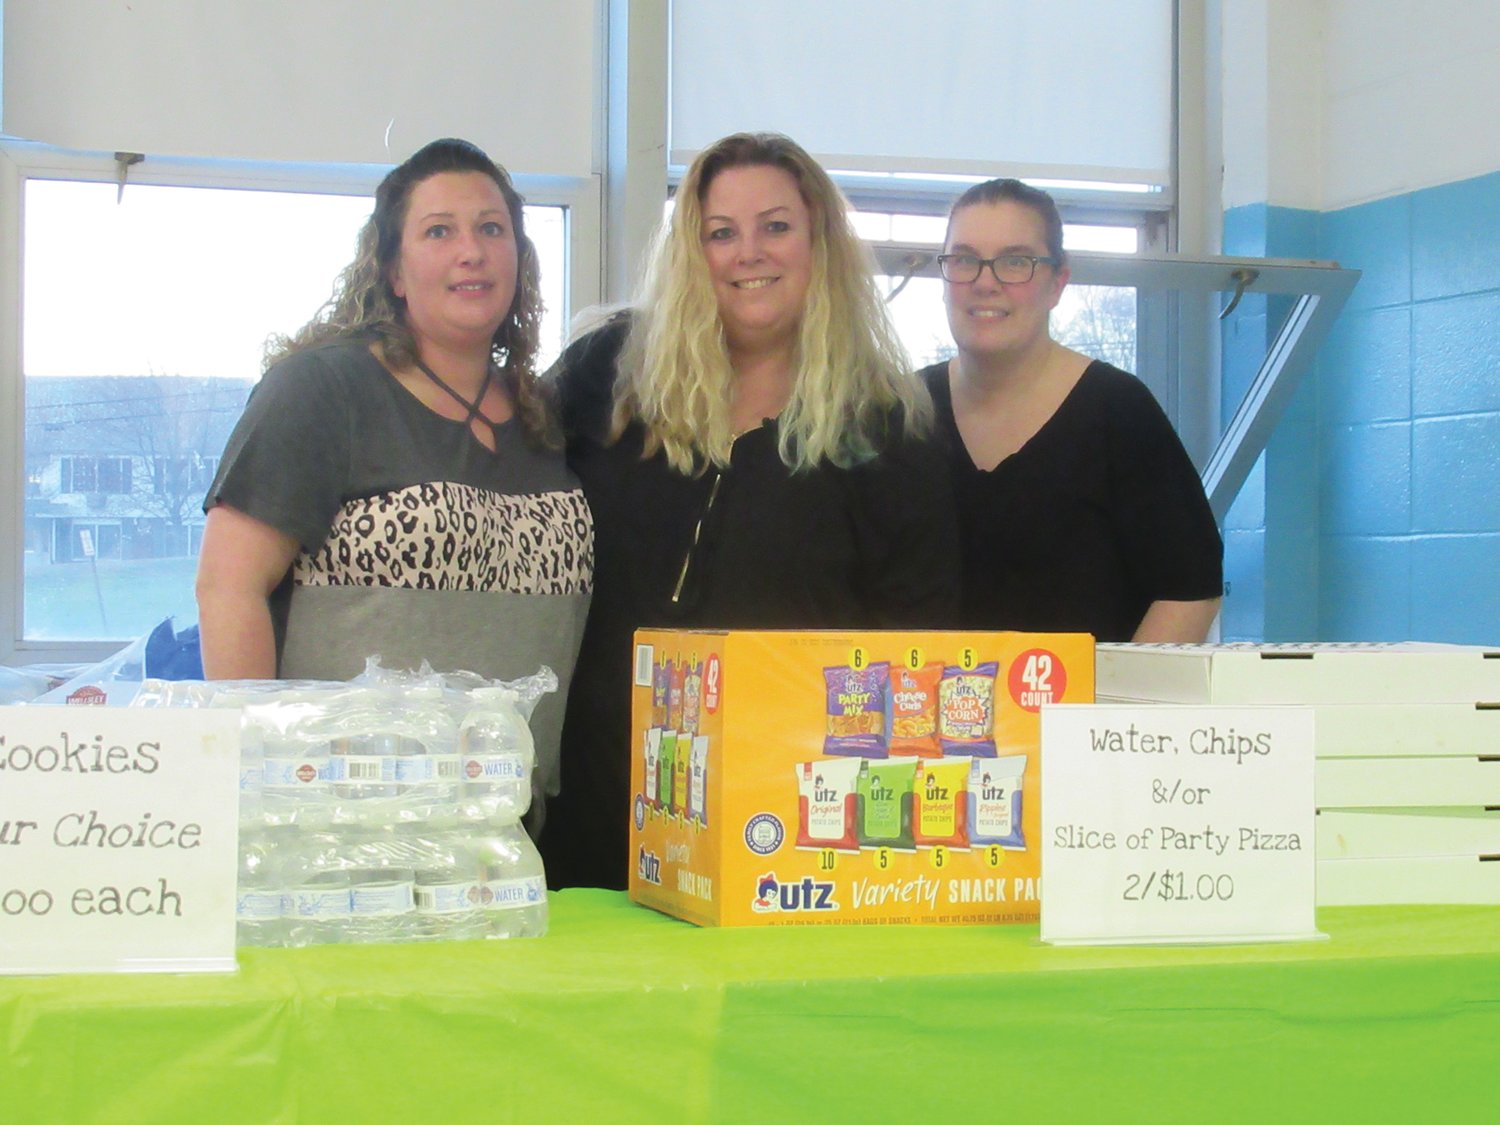 CARD CARRIERS: Dana Stonis, Kelley Cerbo-Charpentier and April Rose show off their bingo cards during last Friday’s fundraiser for Thornton Elementary School.